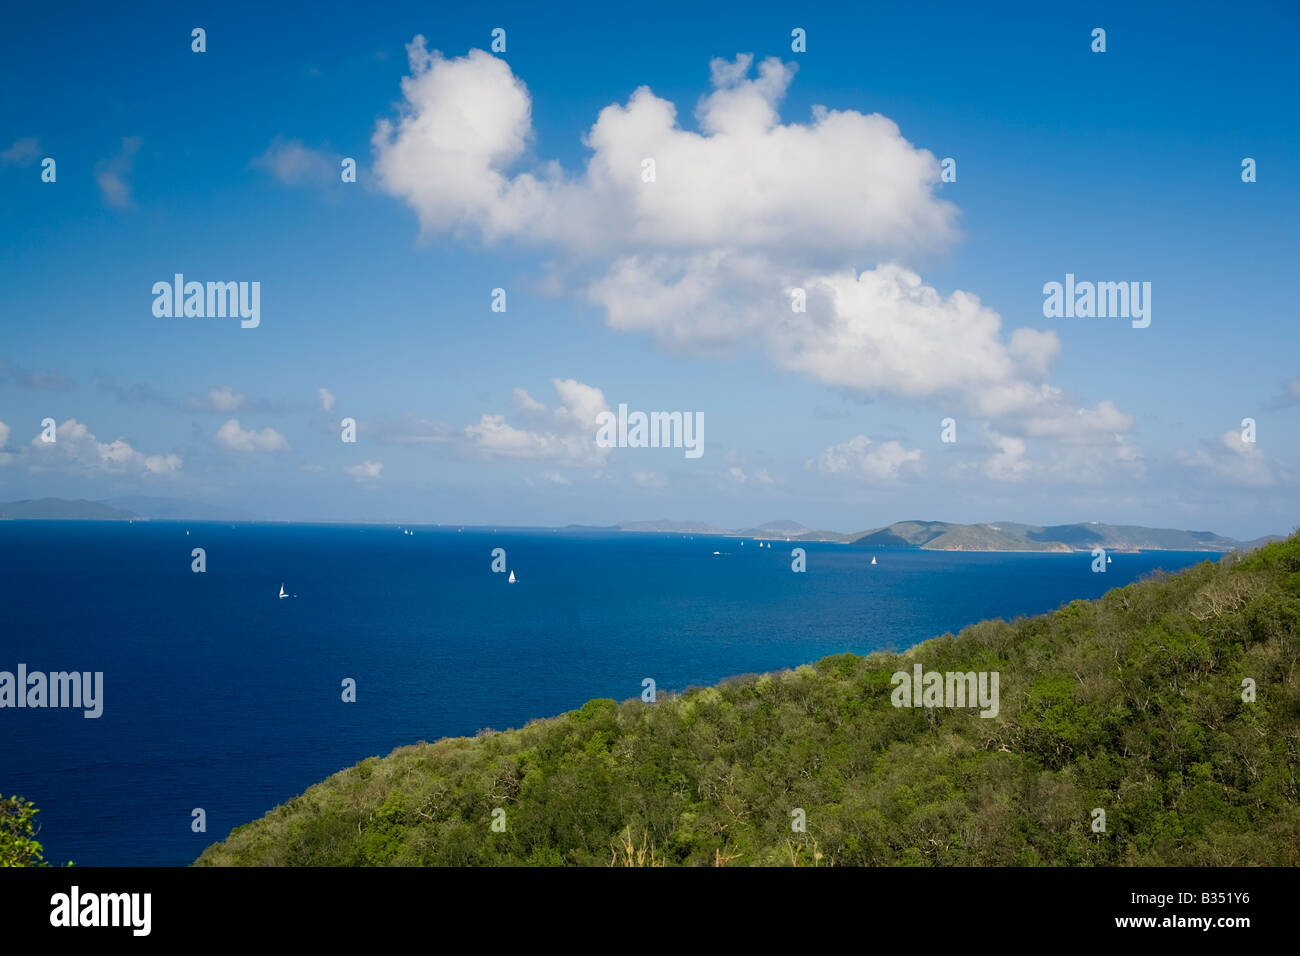 British Virgin Islands across the Sir Francis Drake Channel from St John in the US Virgin Islands Stock Photo